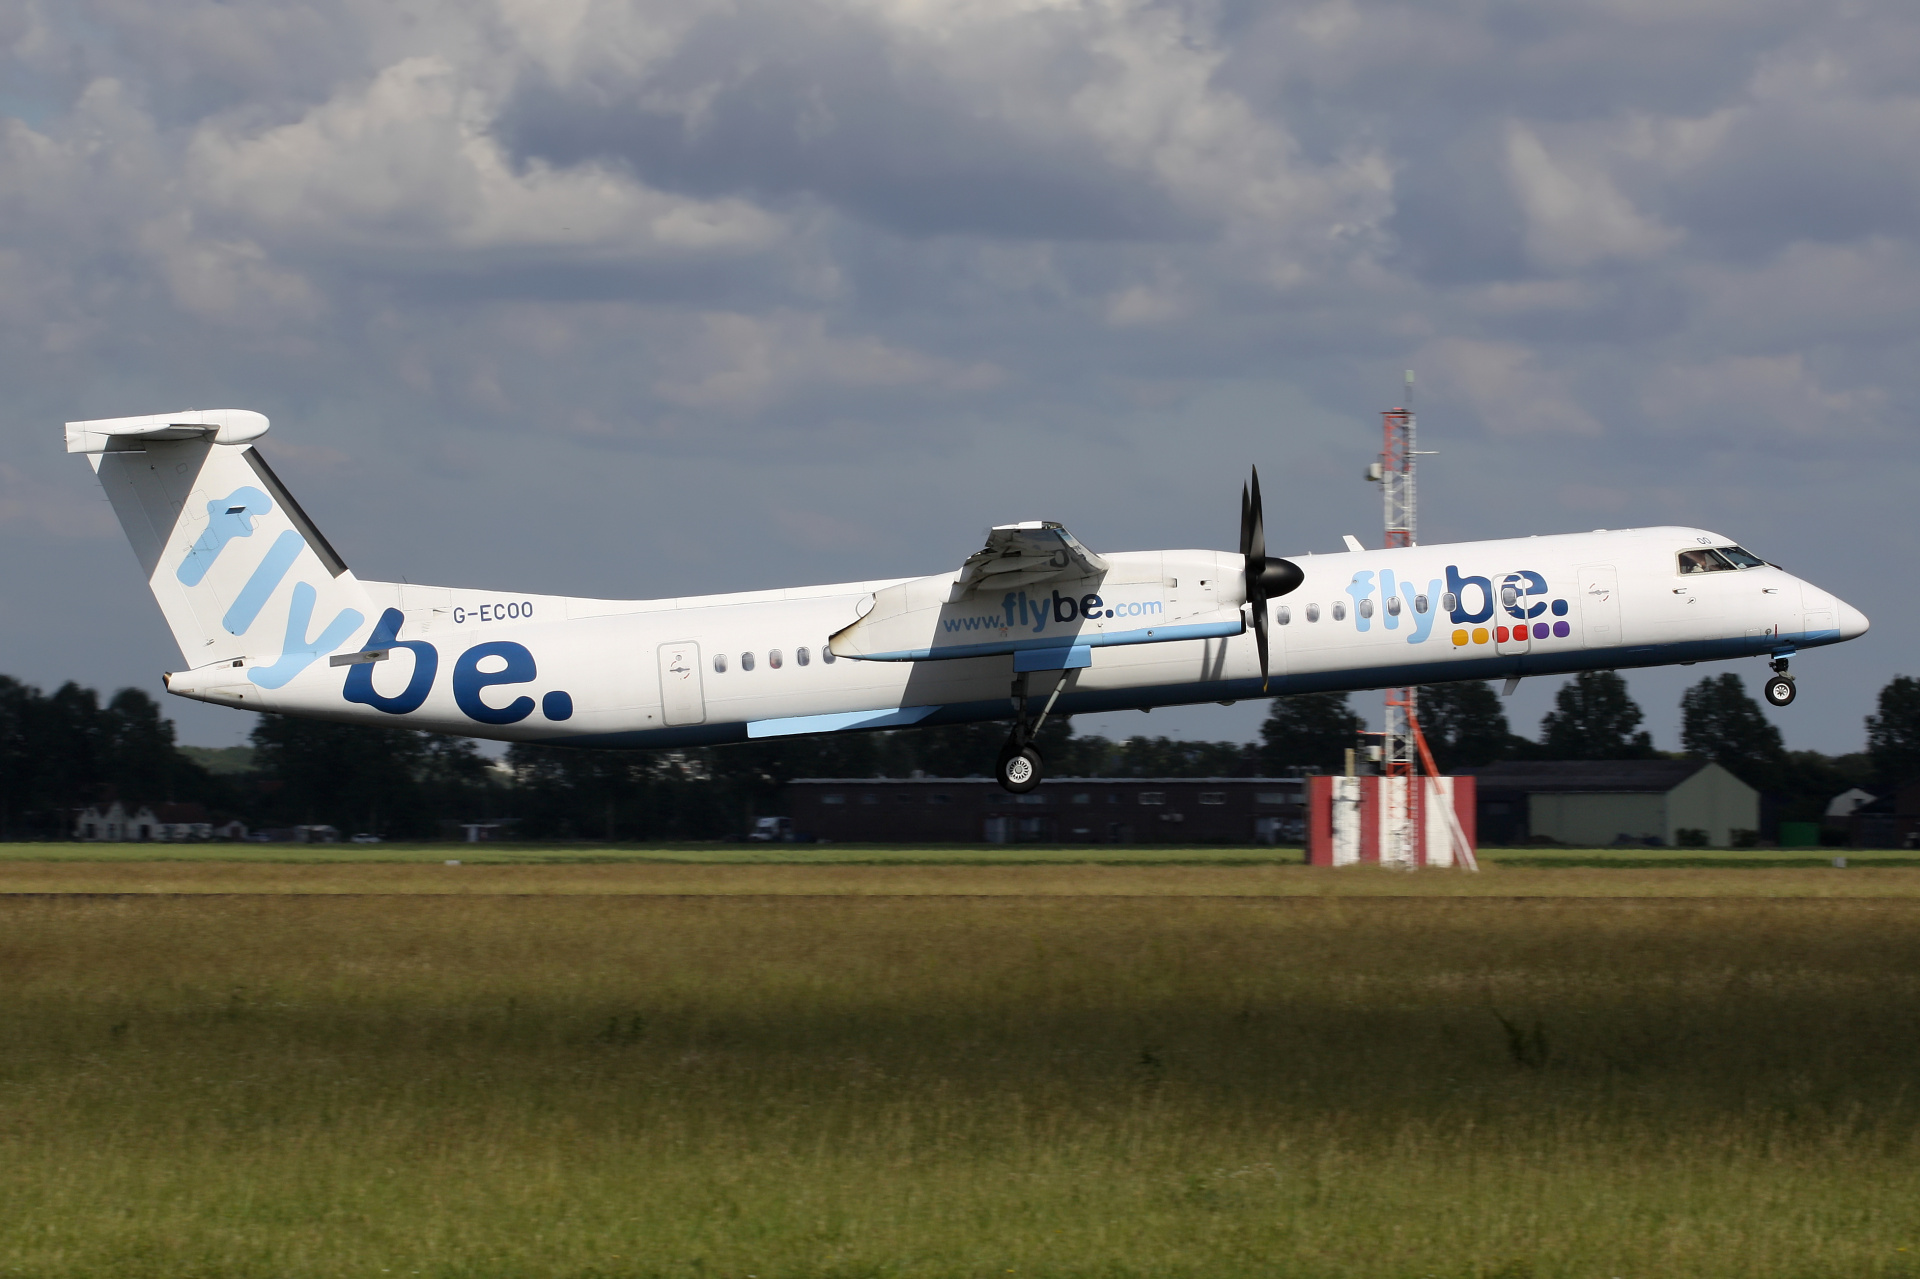 G-ECOO (Aircraft » Schiphol Spotting » Bombardier Q400 Dash 8 » FlyBe)